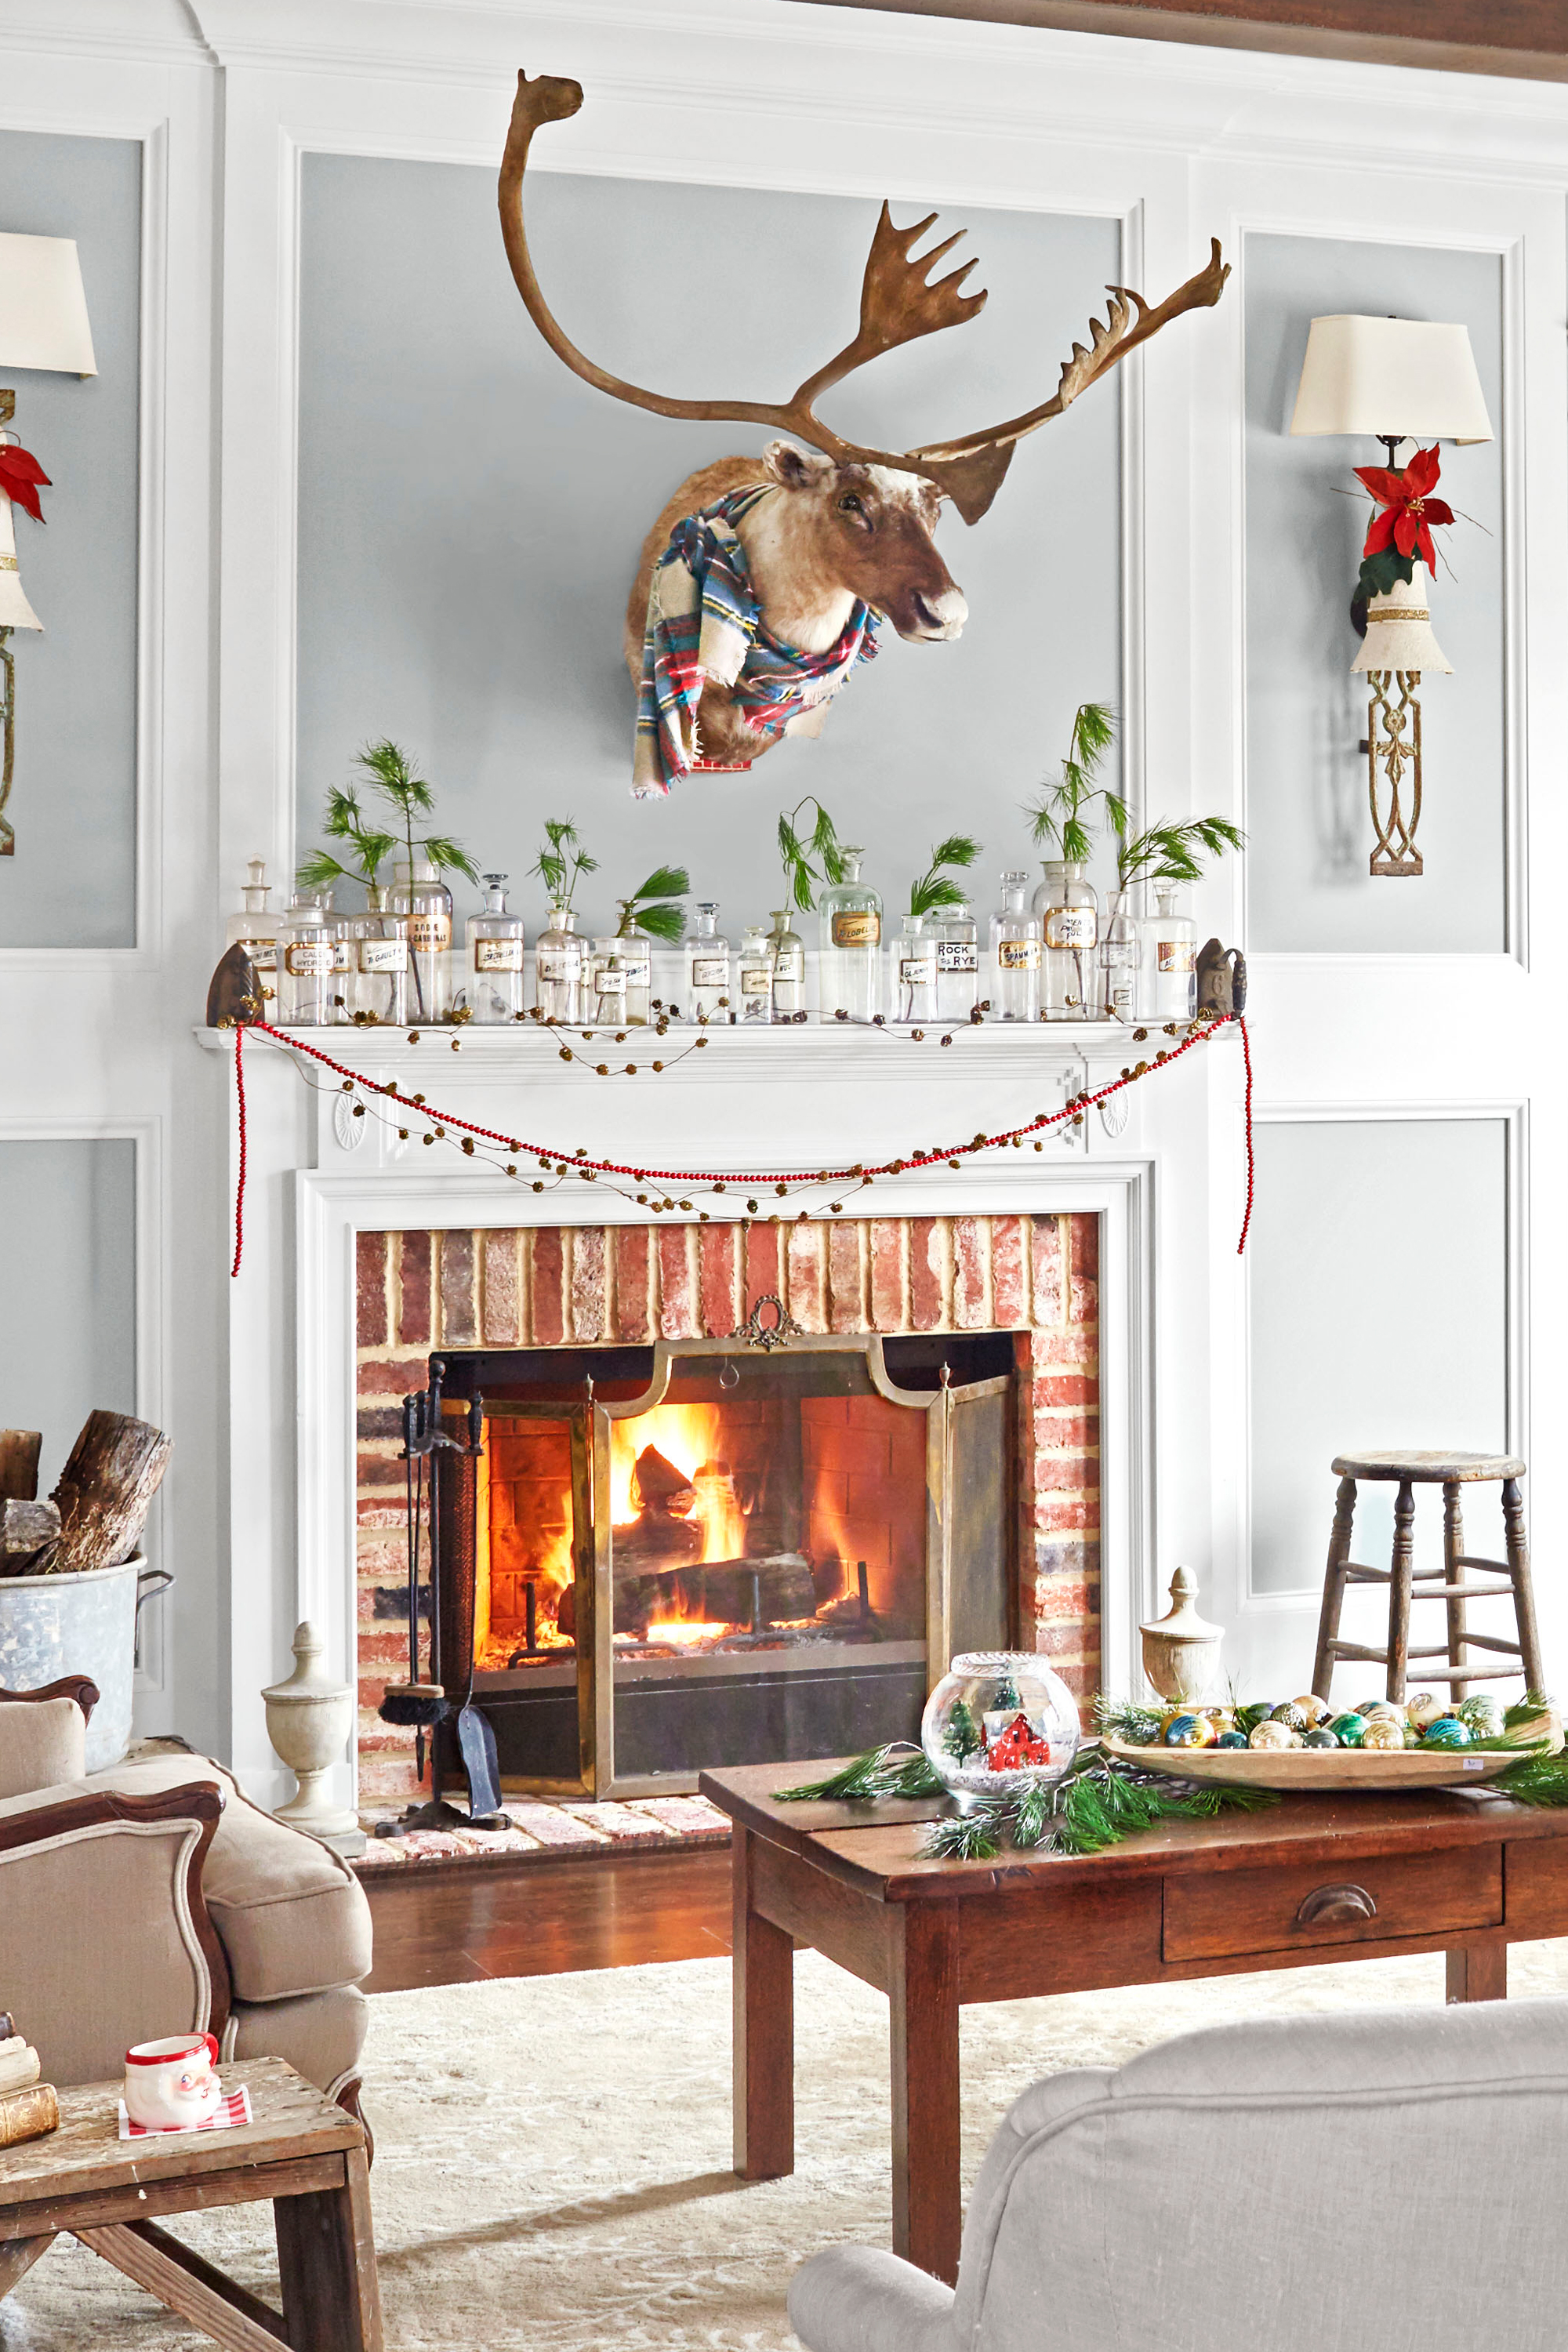 nice fireplace decorating ideas for decorating fireplace mantel for christmas interior design ideas of fireplace decorating ideas